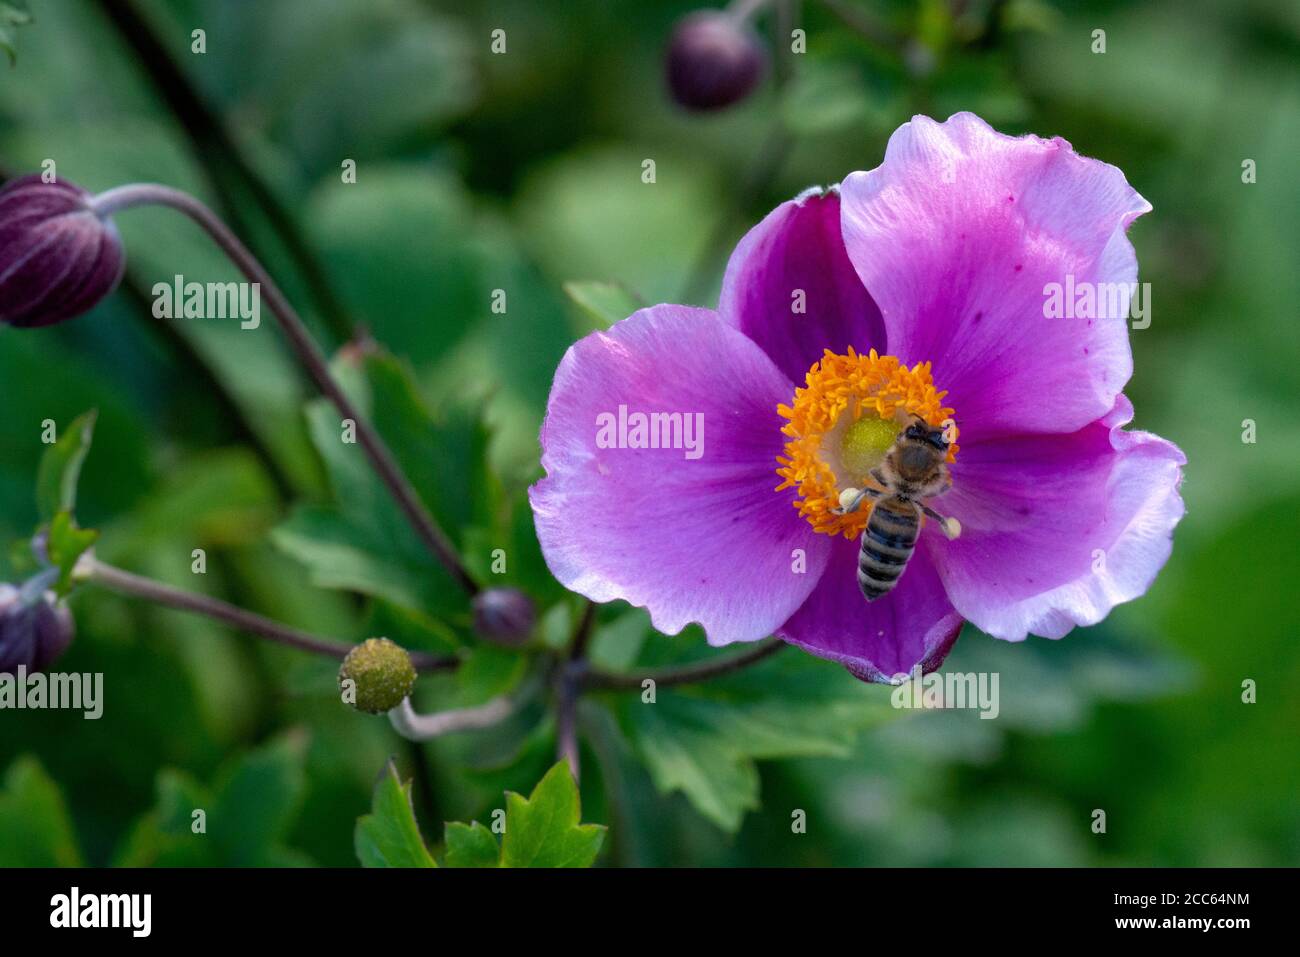 Honey Bee collecting pollen on pink flower blossom of single Anemone Hupehensis Hadspen Abundance or Japanese Anemone Windflower flowering plant in bloom Stock Photo